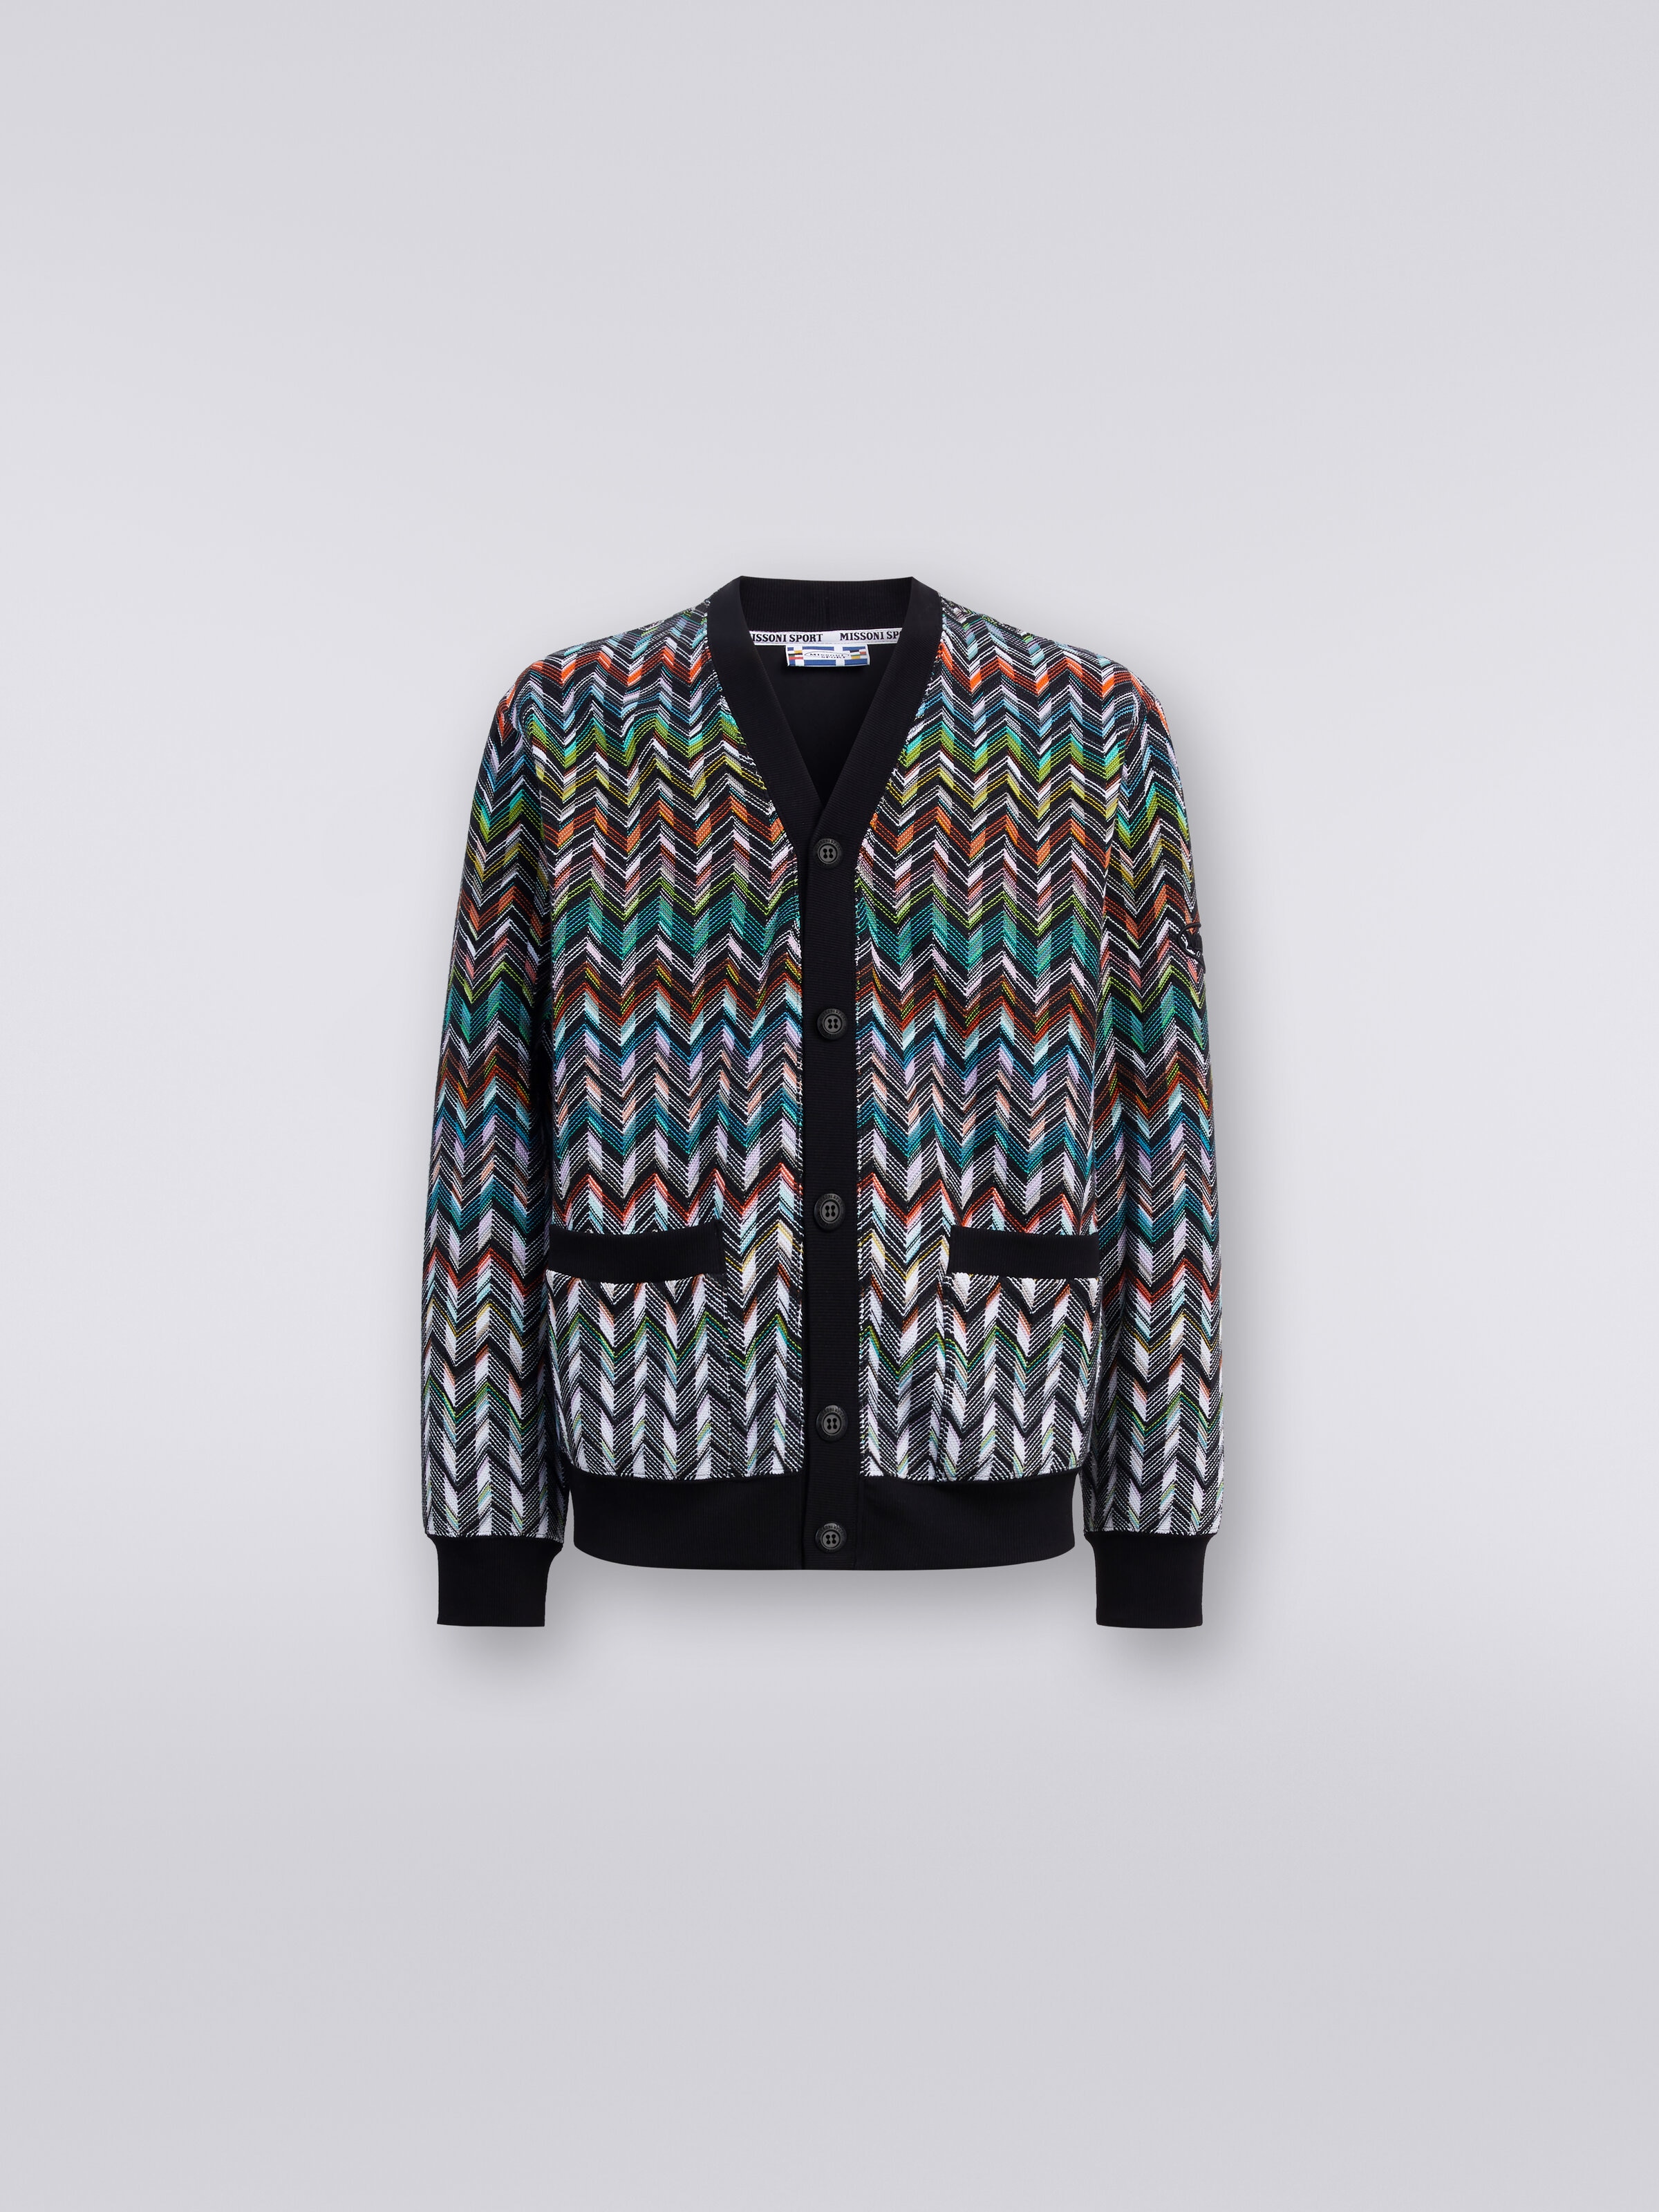 Cardigan in zigzag knit with plain trim, Multicoloured  - 0